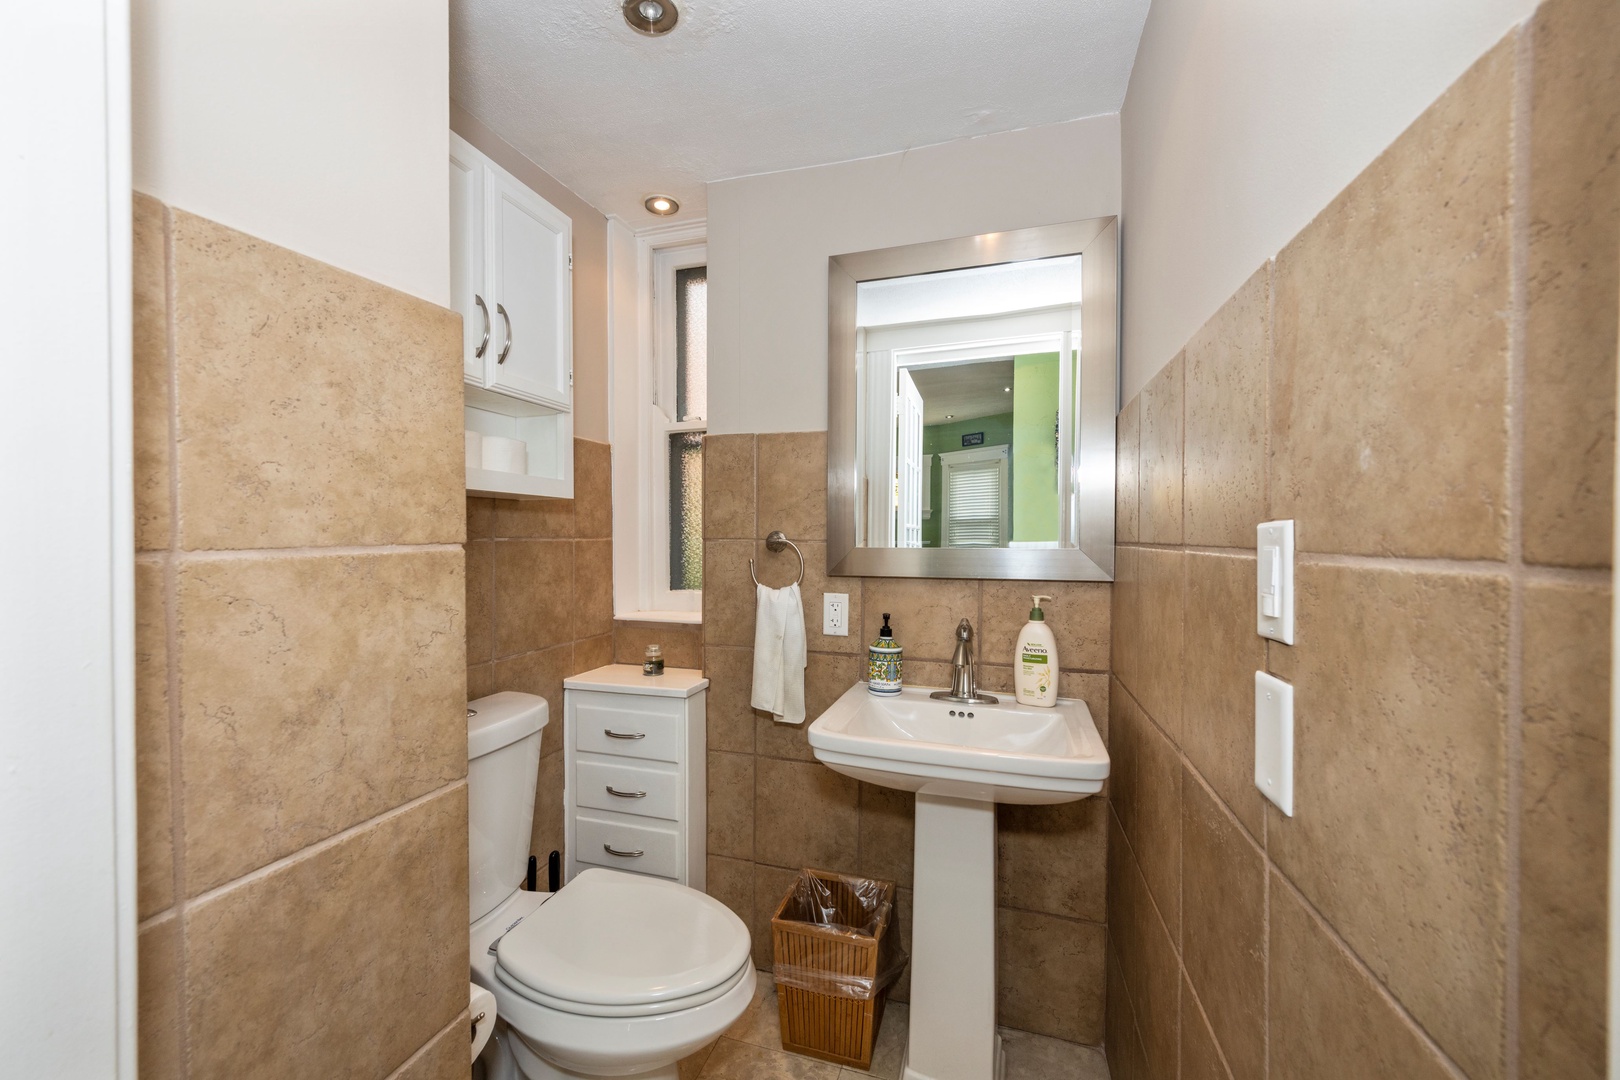 A convenient half bath is tucked away on the main level